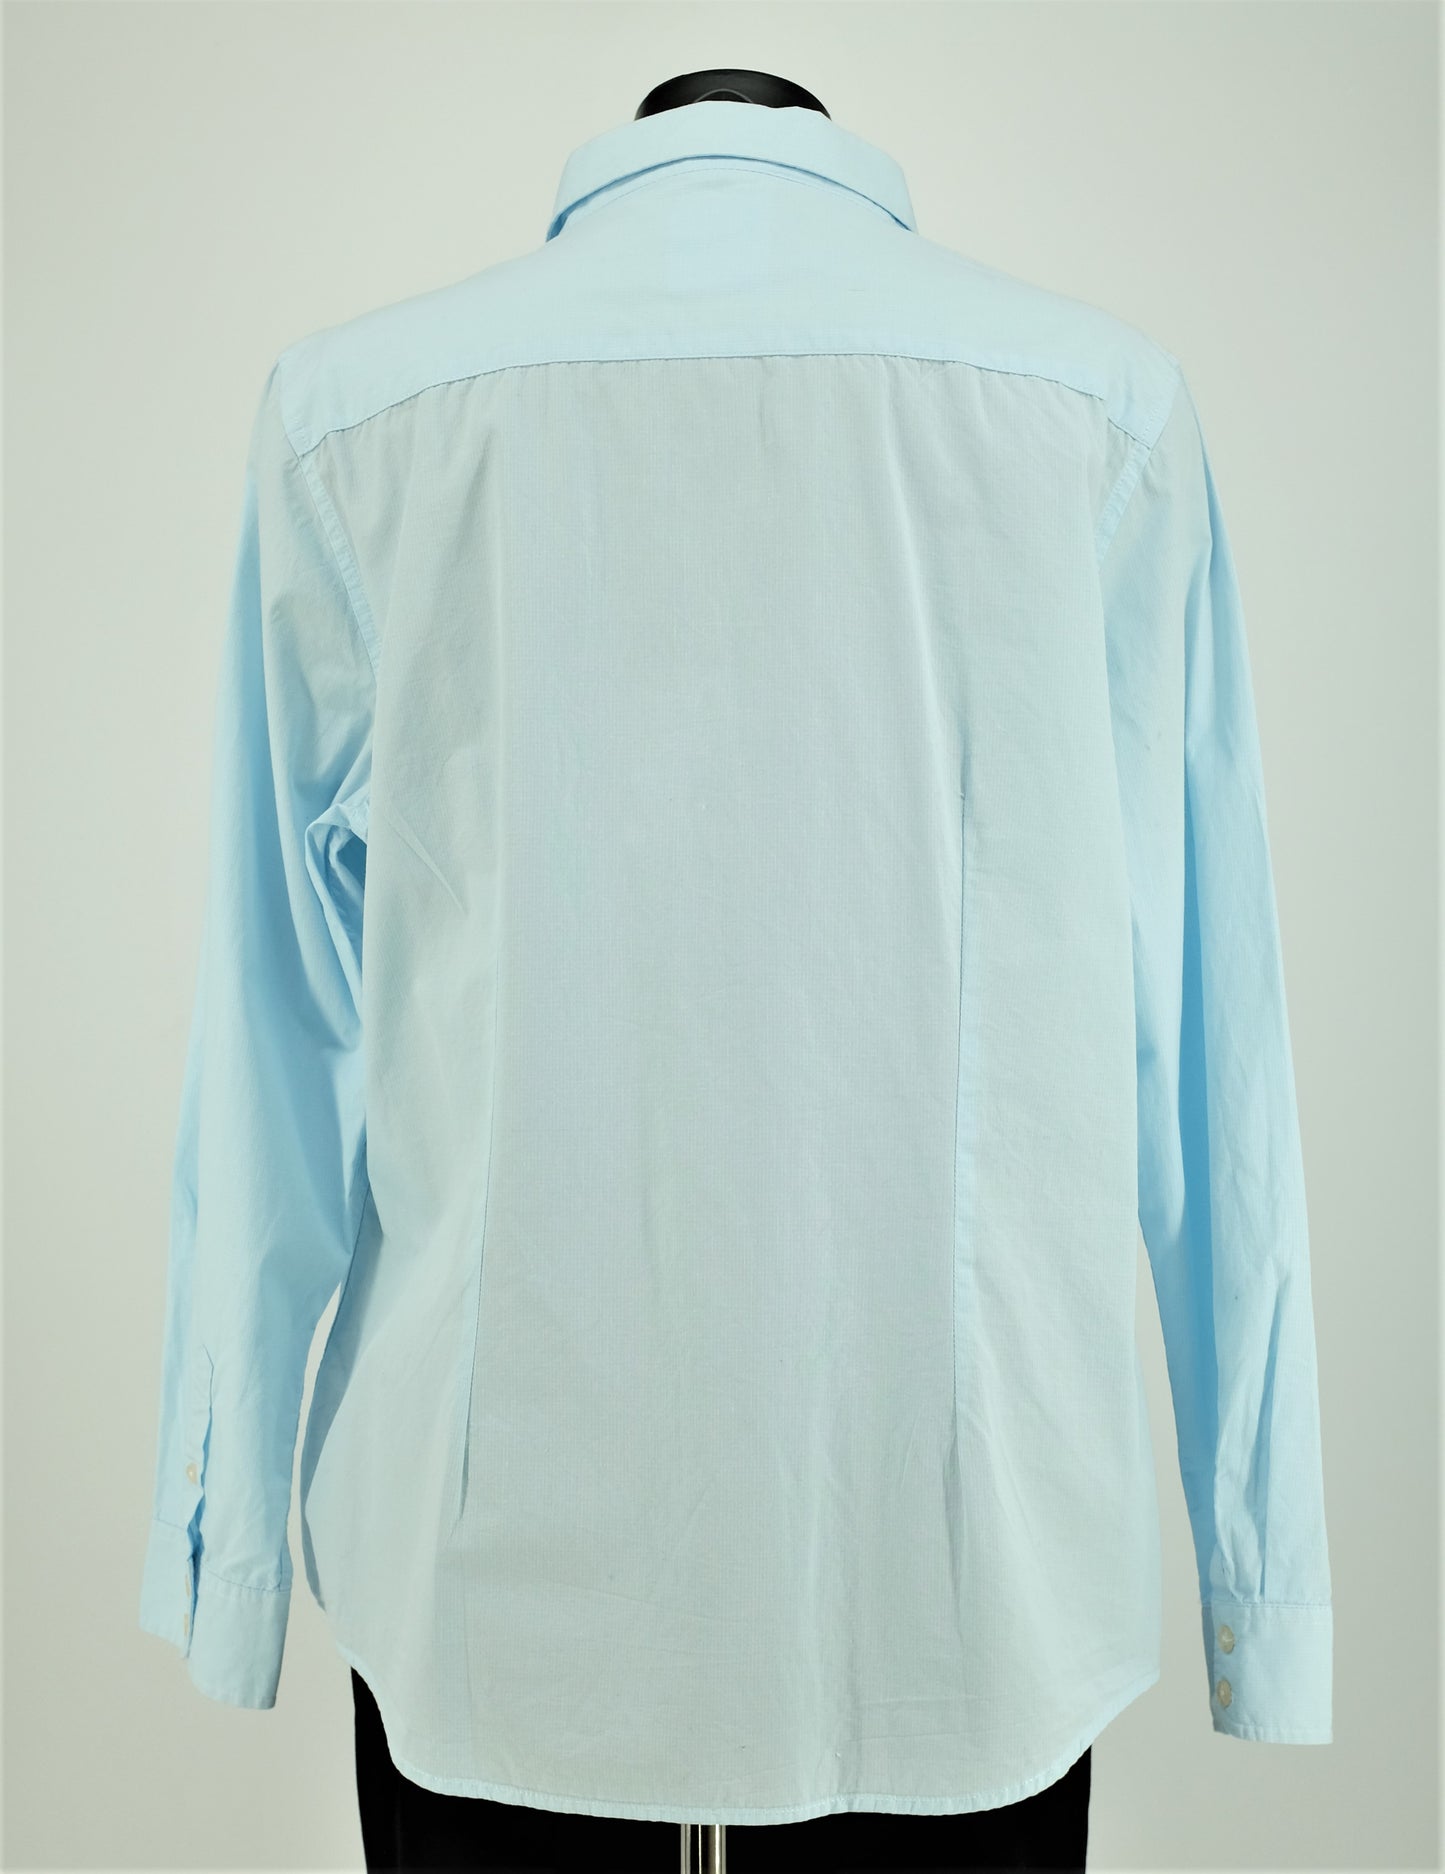 Crew Clothing Co. Blue Formal Ladies Shirt - Size 18